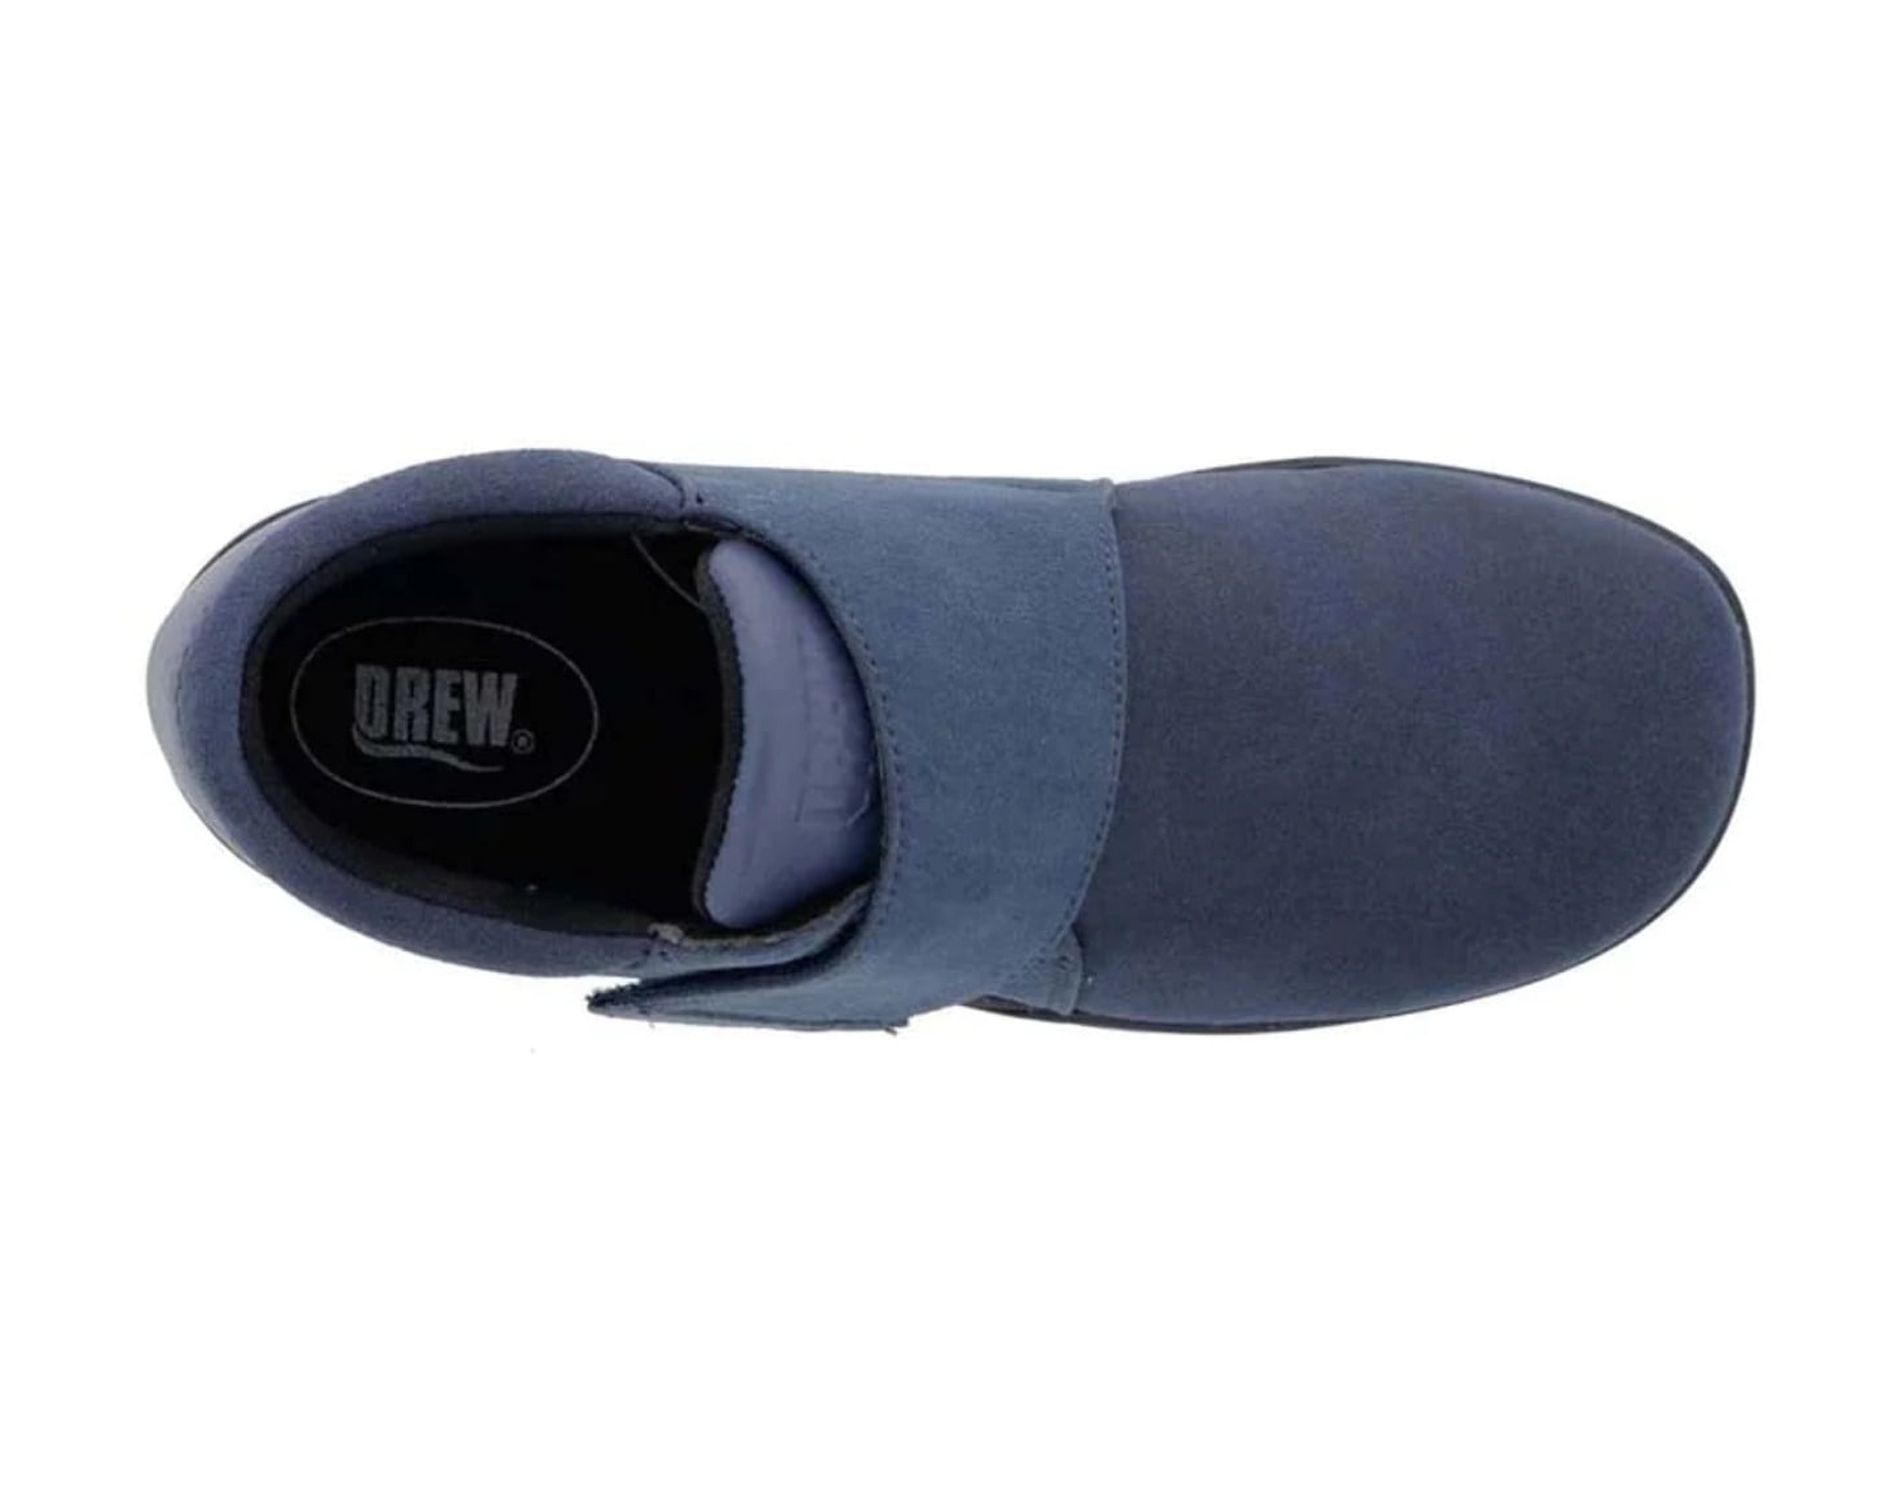 DREW MOONWALK WOMEN CASUAL SHOE IN NAVY STRETCH LEATHER - image 3 of 4